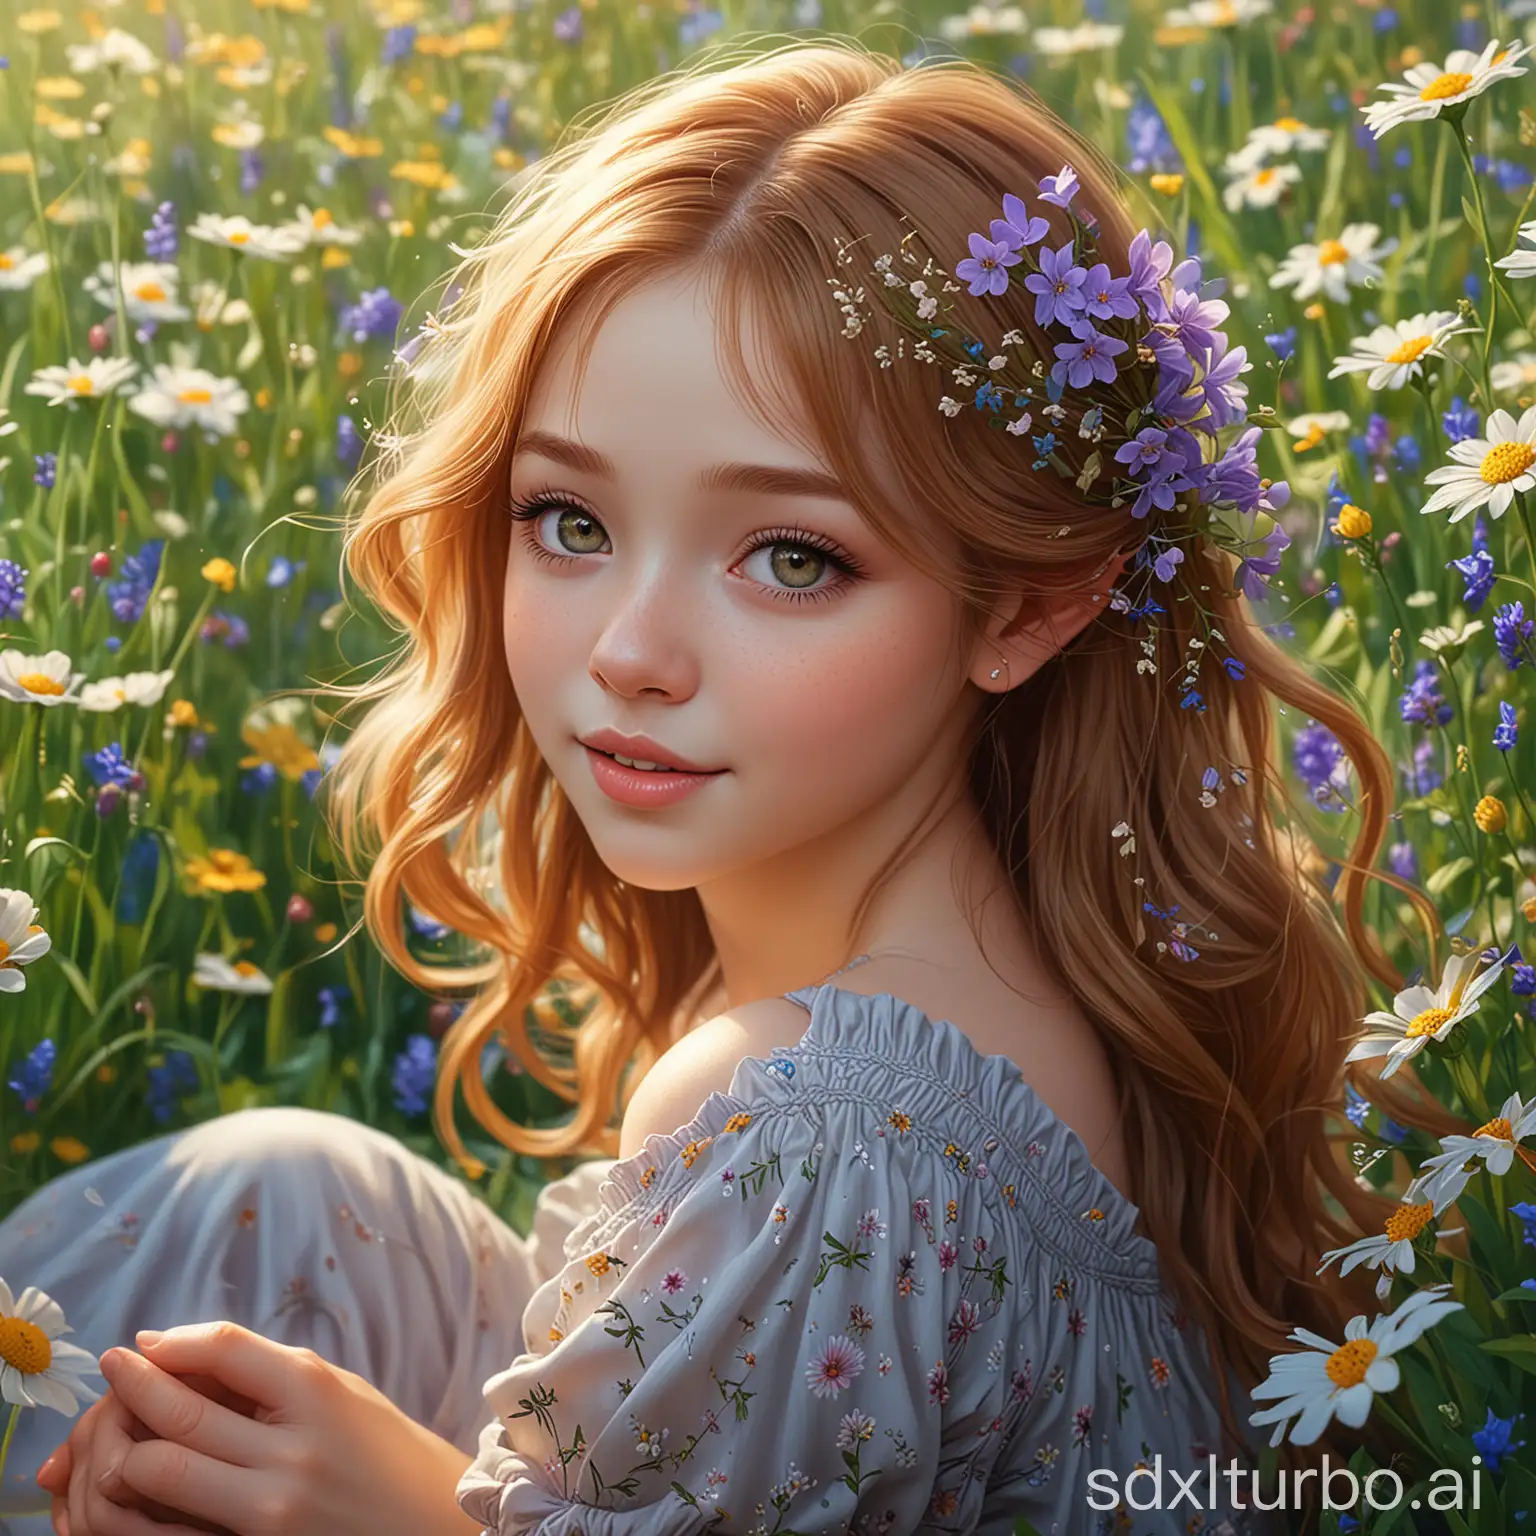 art by kajenna art by miki asai and jasmine becket griffith 

a beutifull young  skin happy girl with goldbrown hair sitting in the flowers 

art by Cameron Gray "Wild Flowers In Field" ultra highly detailed, 

detailed digital painting, 

highly detailed, 

intricate detail, 

clarity, 

high quality, 

32K